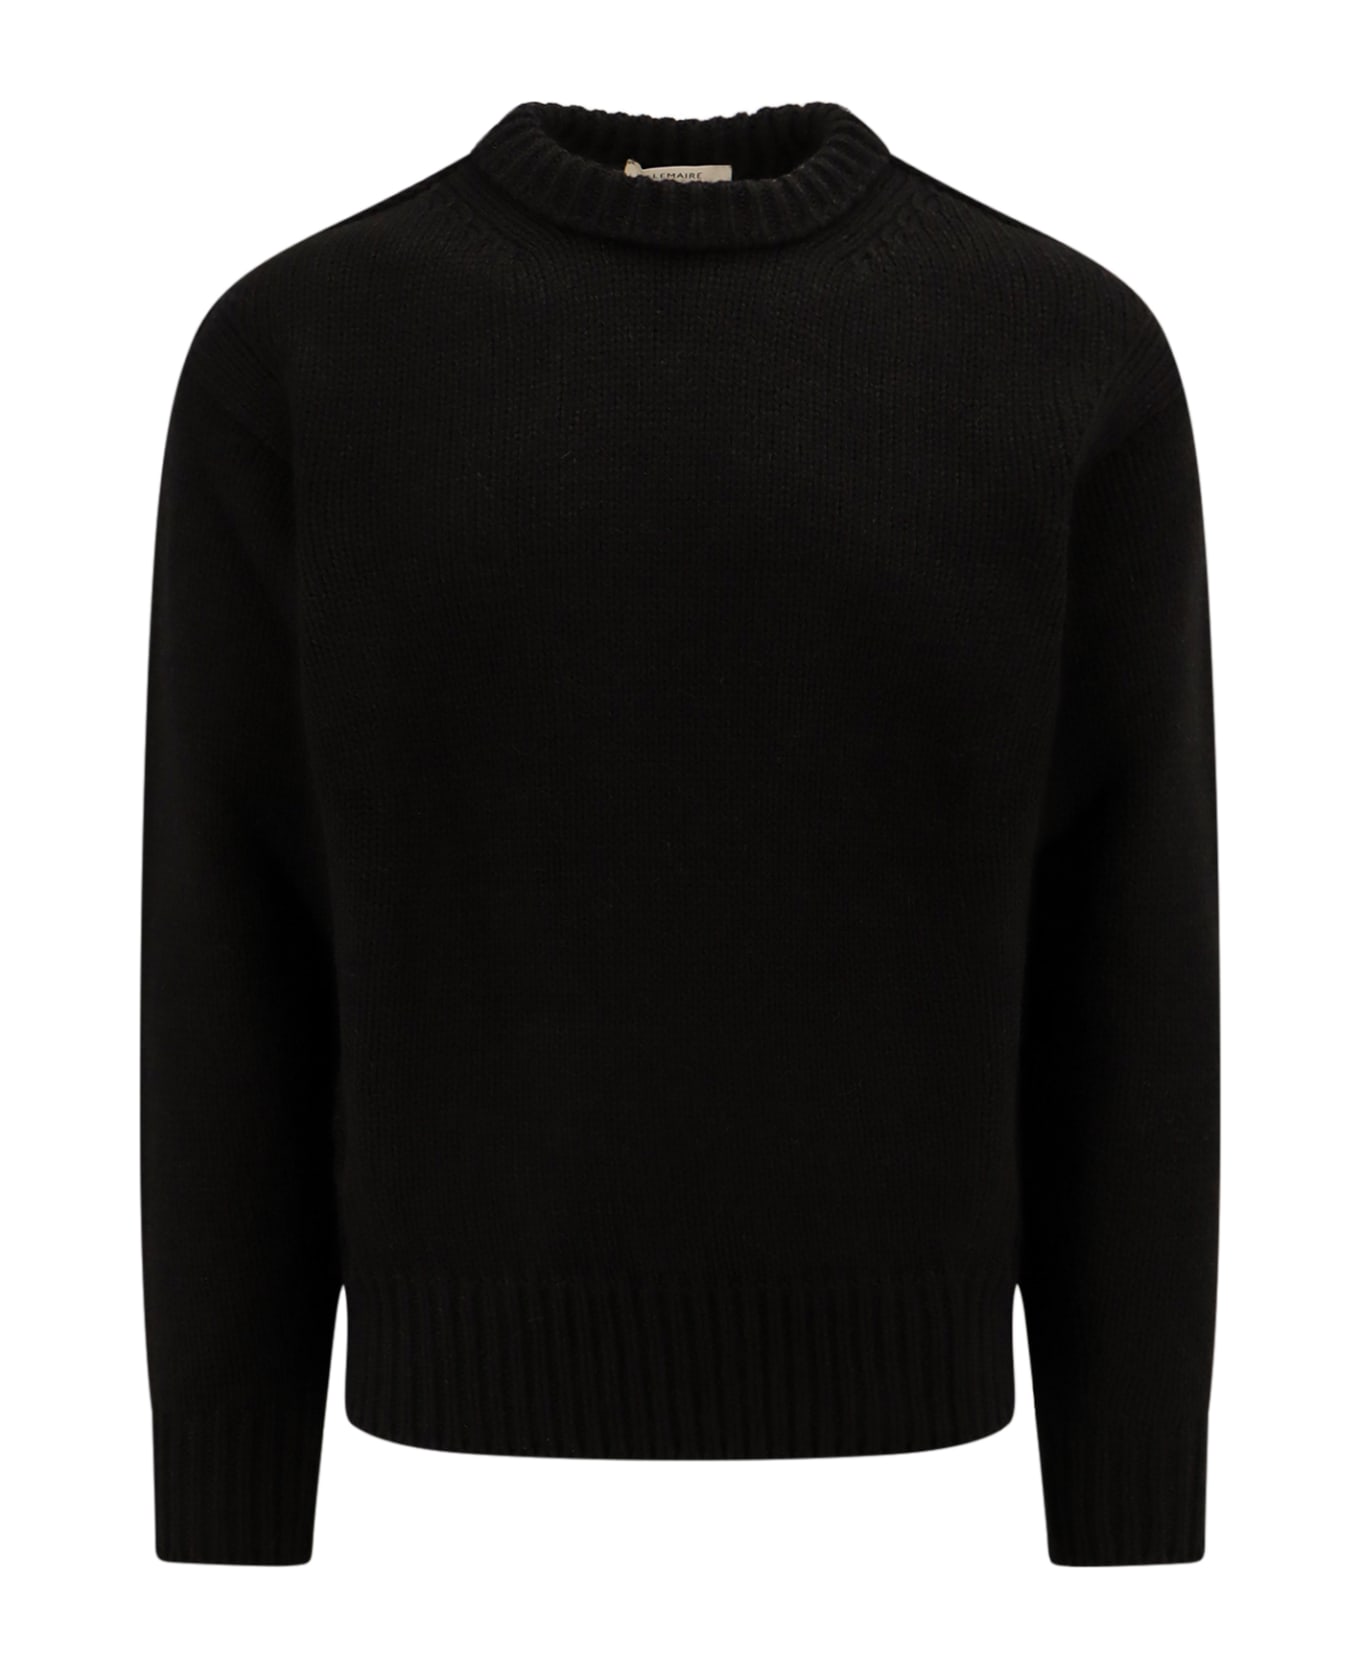 Lemaire Sweater - Black